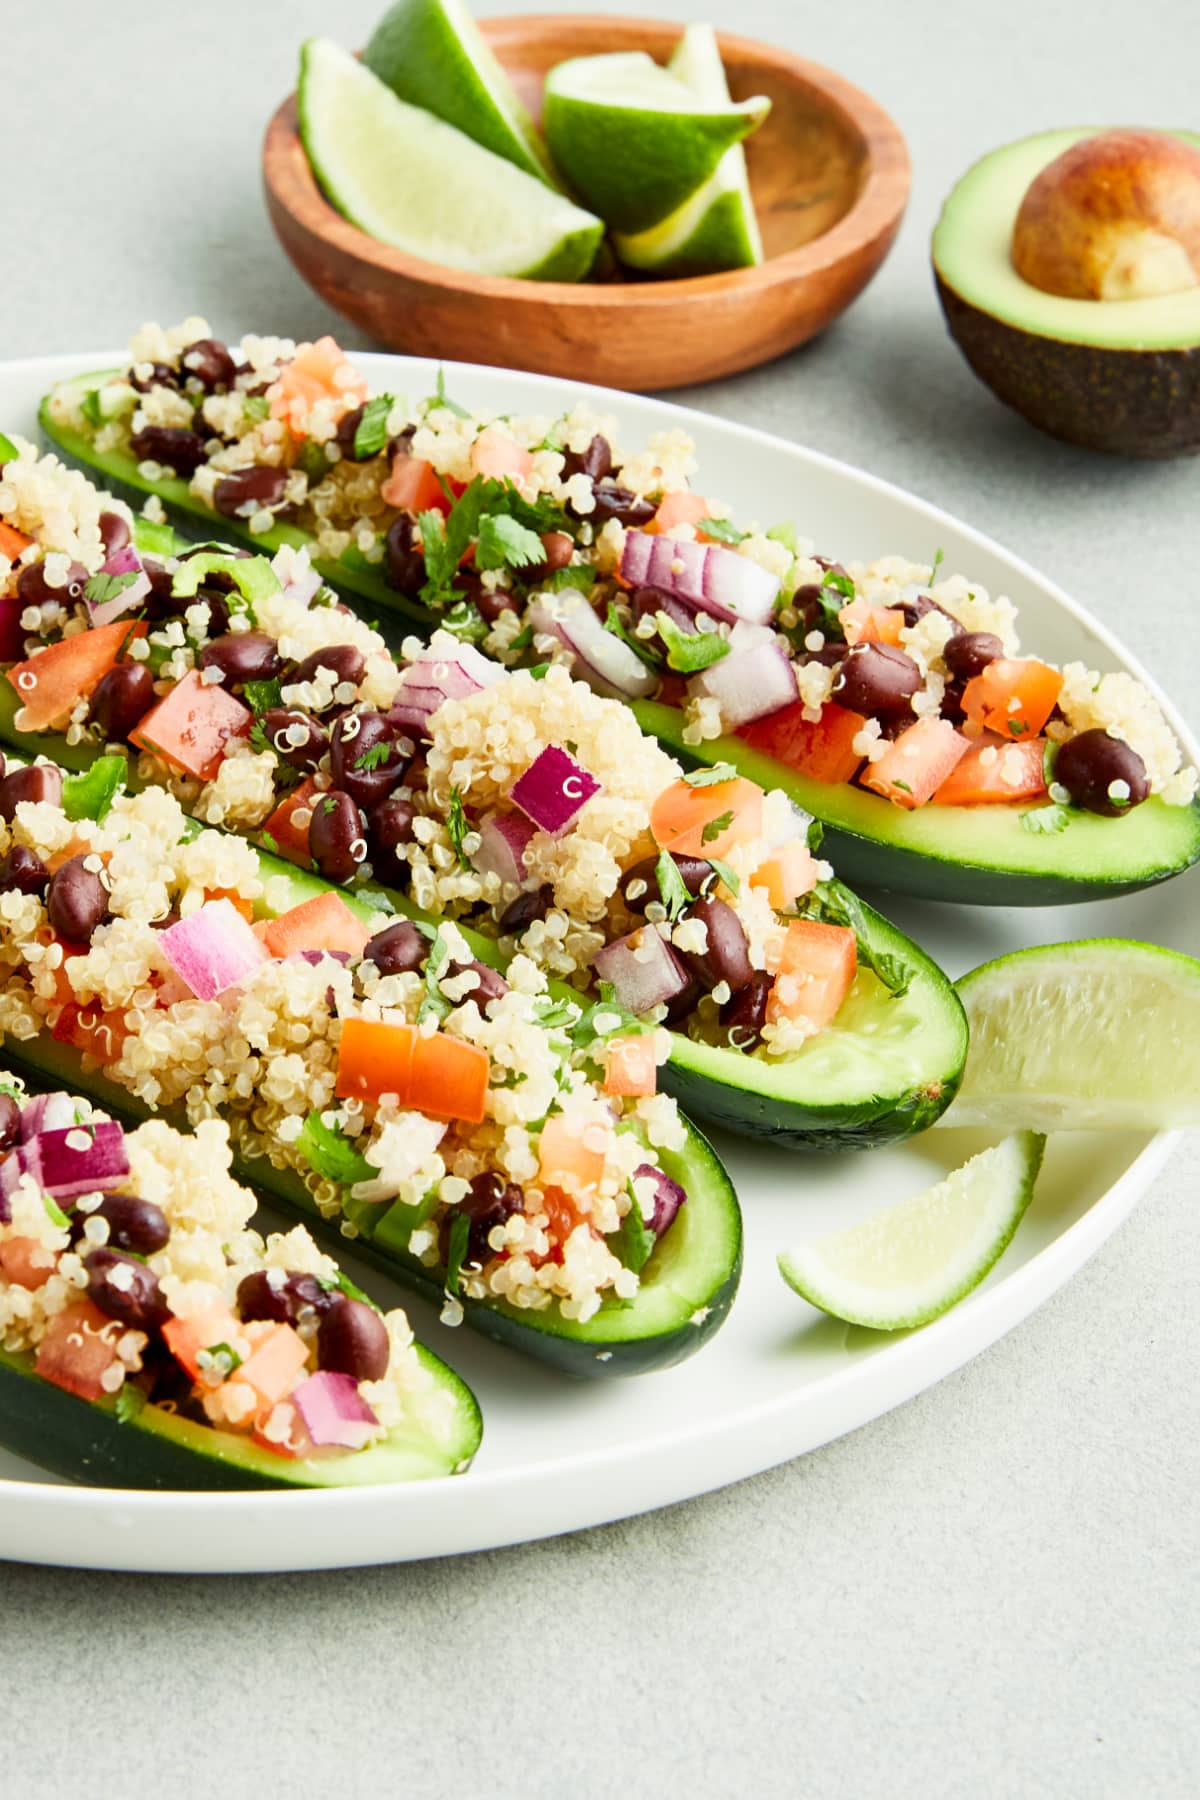 Four cucumber boats filled with a tex mex mixture of beans, quinoa, tomato and onion sit on a white plate. A small wooden bowl of lime wedges and a half avocado sit next to the plate.